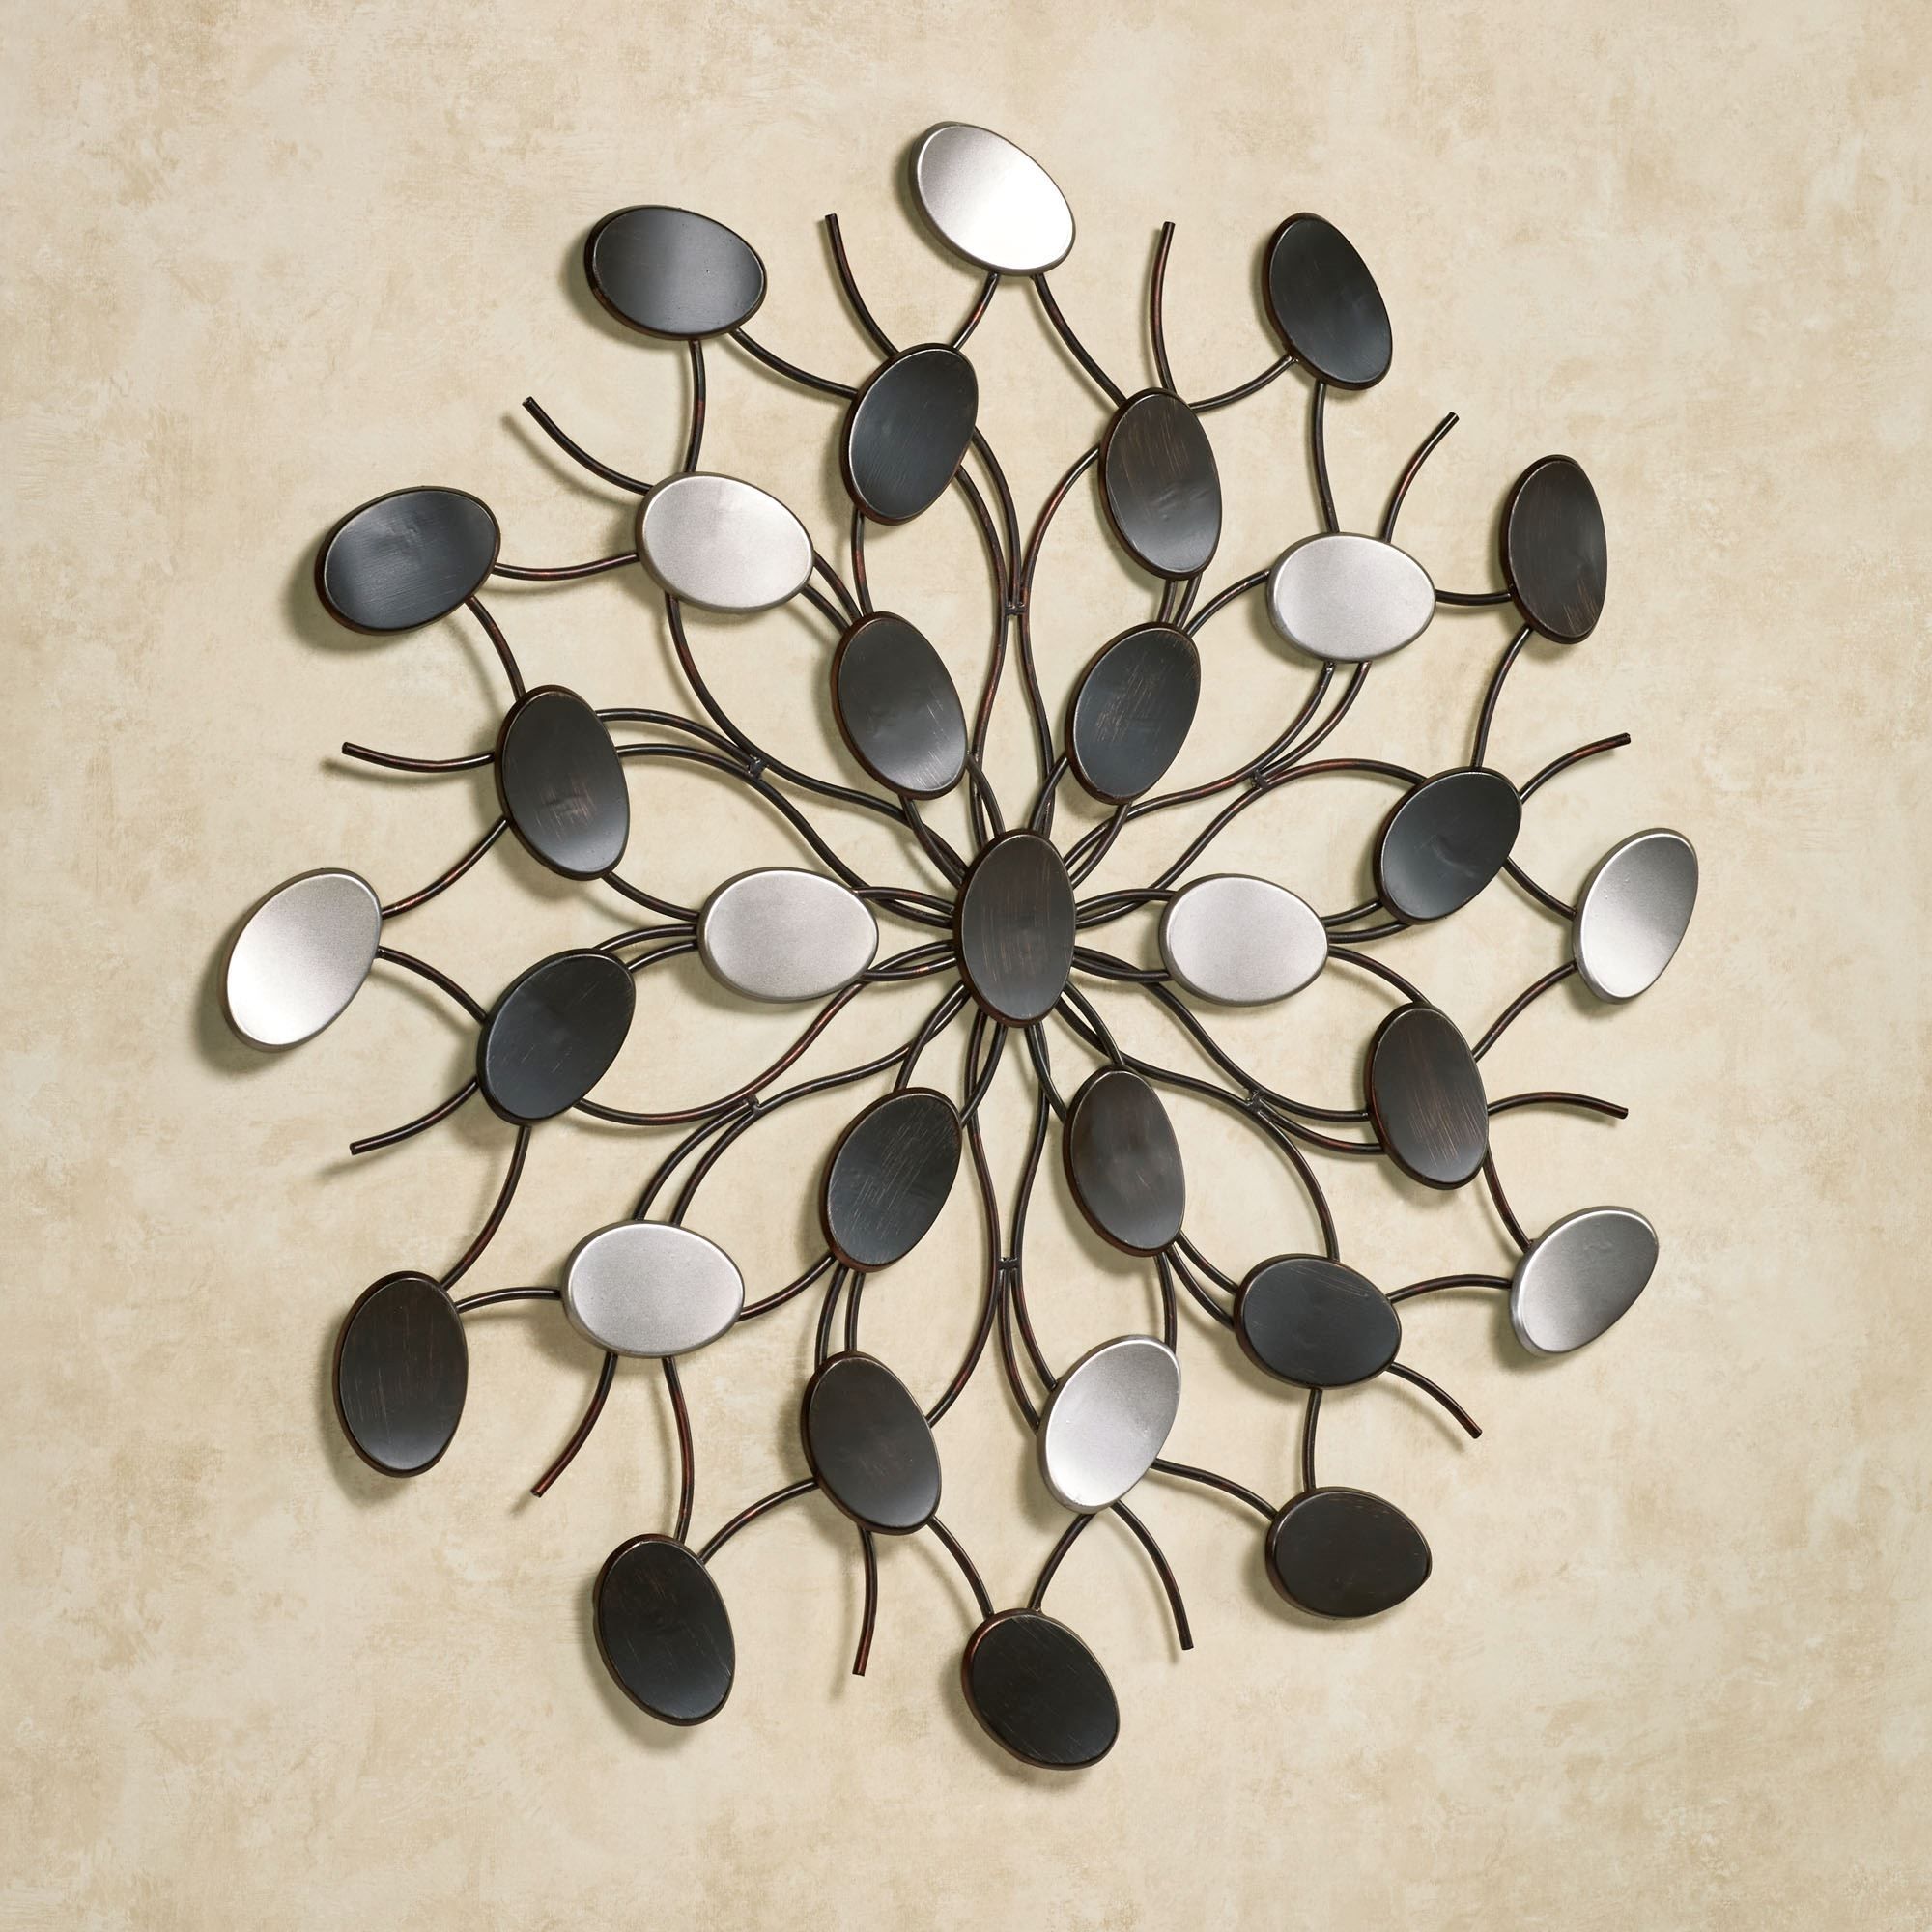 Radiant Petals Abstract Metal Wall Art With Best And Newest Wall Art Metal (View 3 of 20)